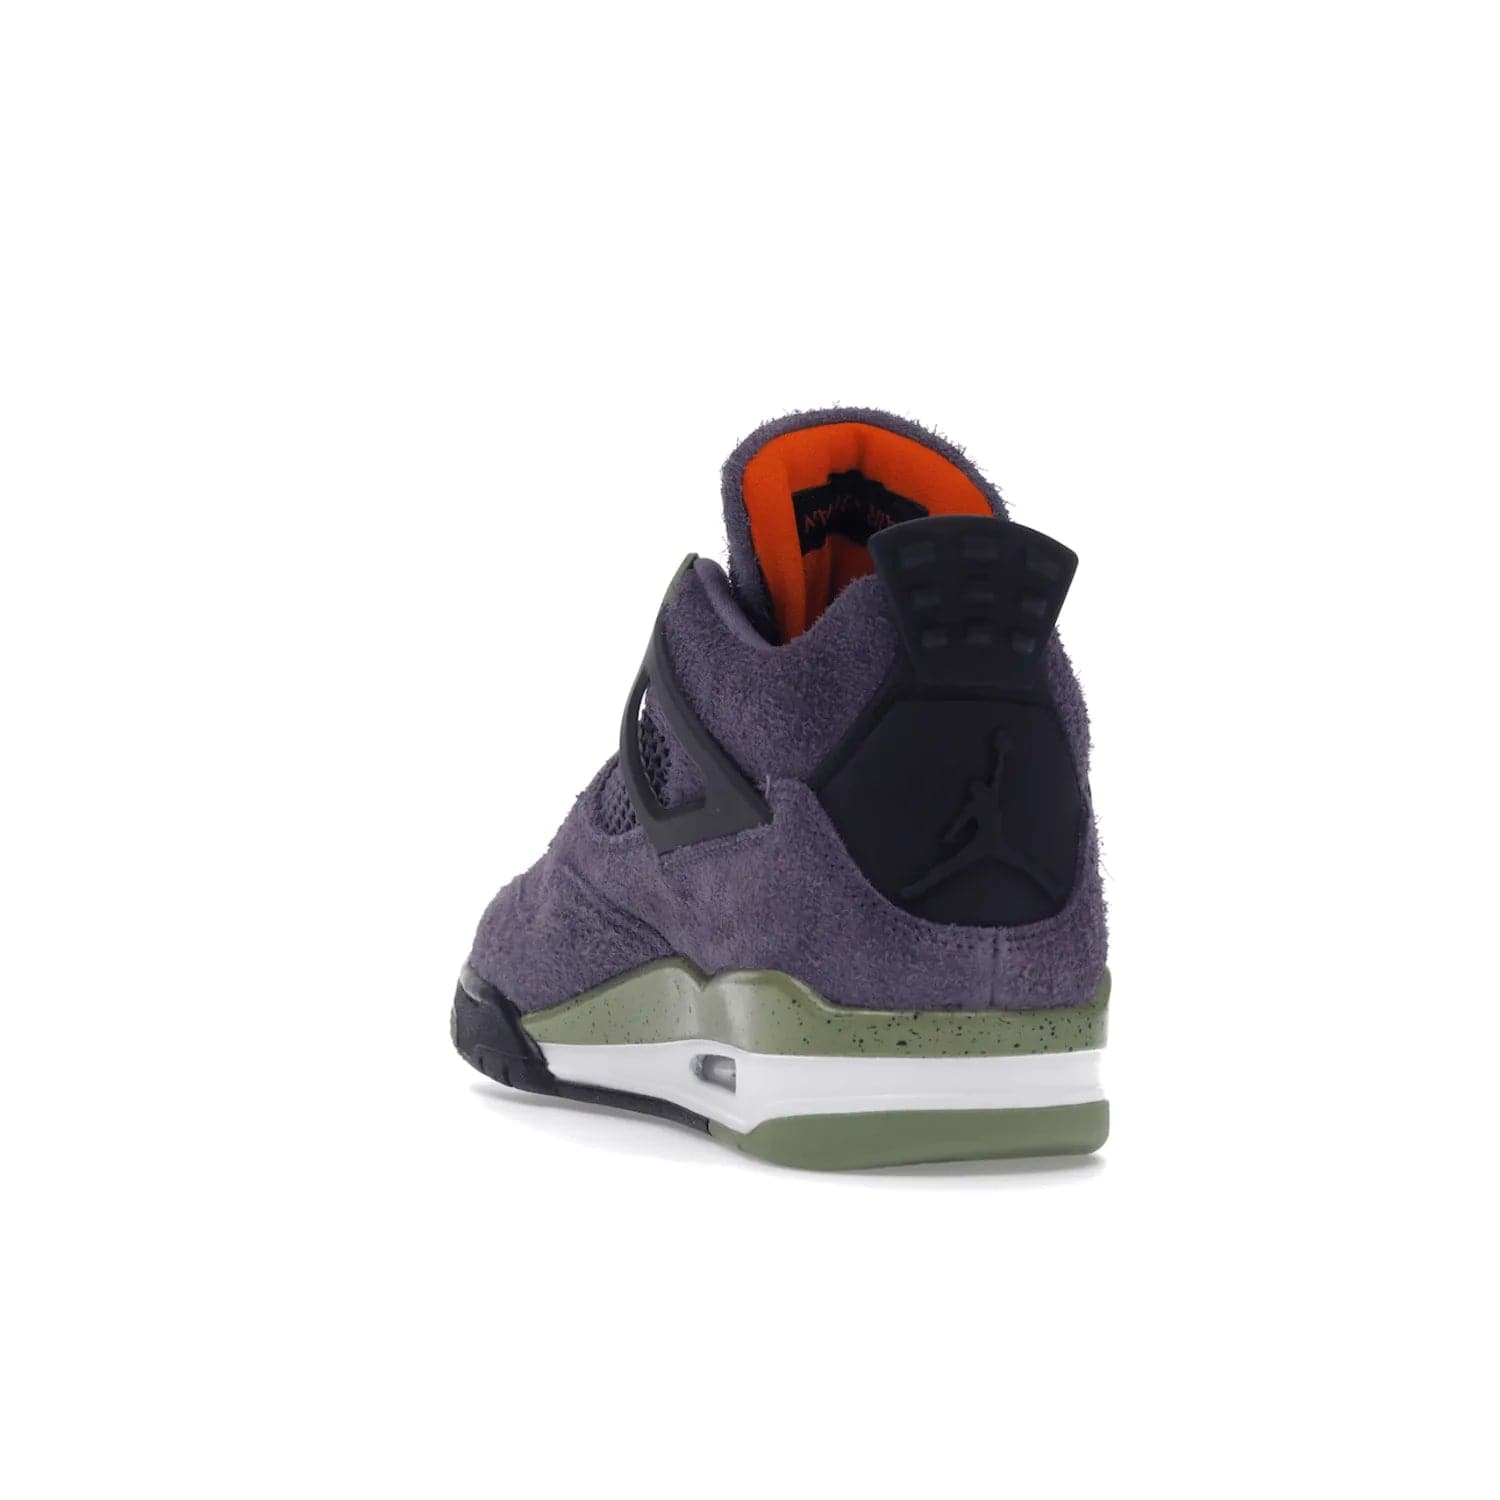 Jordan 4 Retro Canyon Purple (Women's) - Image 26 - Only at www.BallersClubKickz.com - New Air Jordan 4 Retro Canyon Purple W sneaker features shaggy purple suede, lime highlights & safety orange Jumpman branding. Classic ankle-hugging silhouette with modern colors released 15/10/2022.